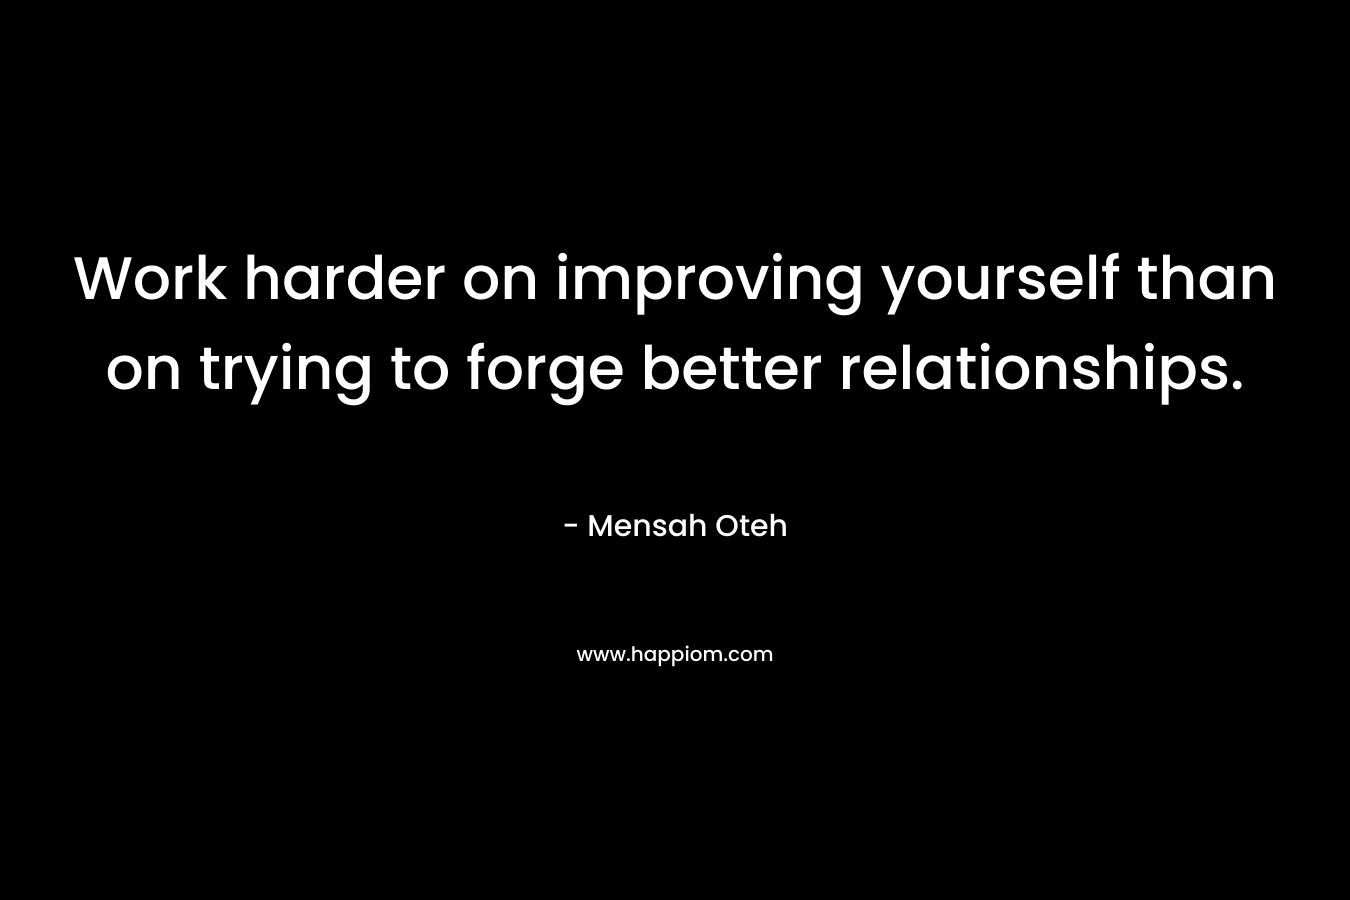 Work harder on improving yourself than on trying to forge better relationships. – Mensah Oteh